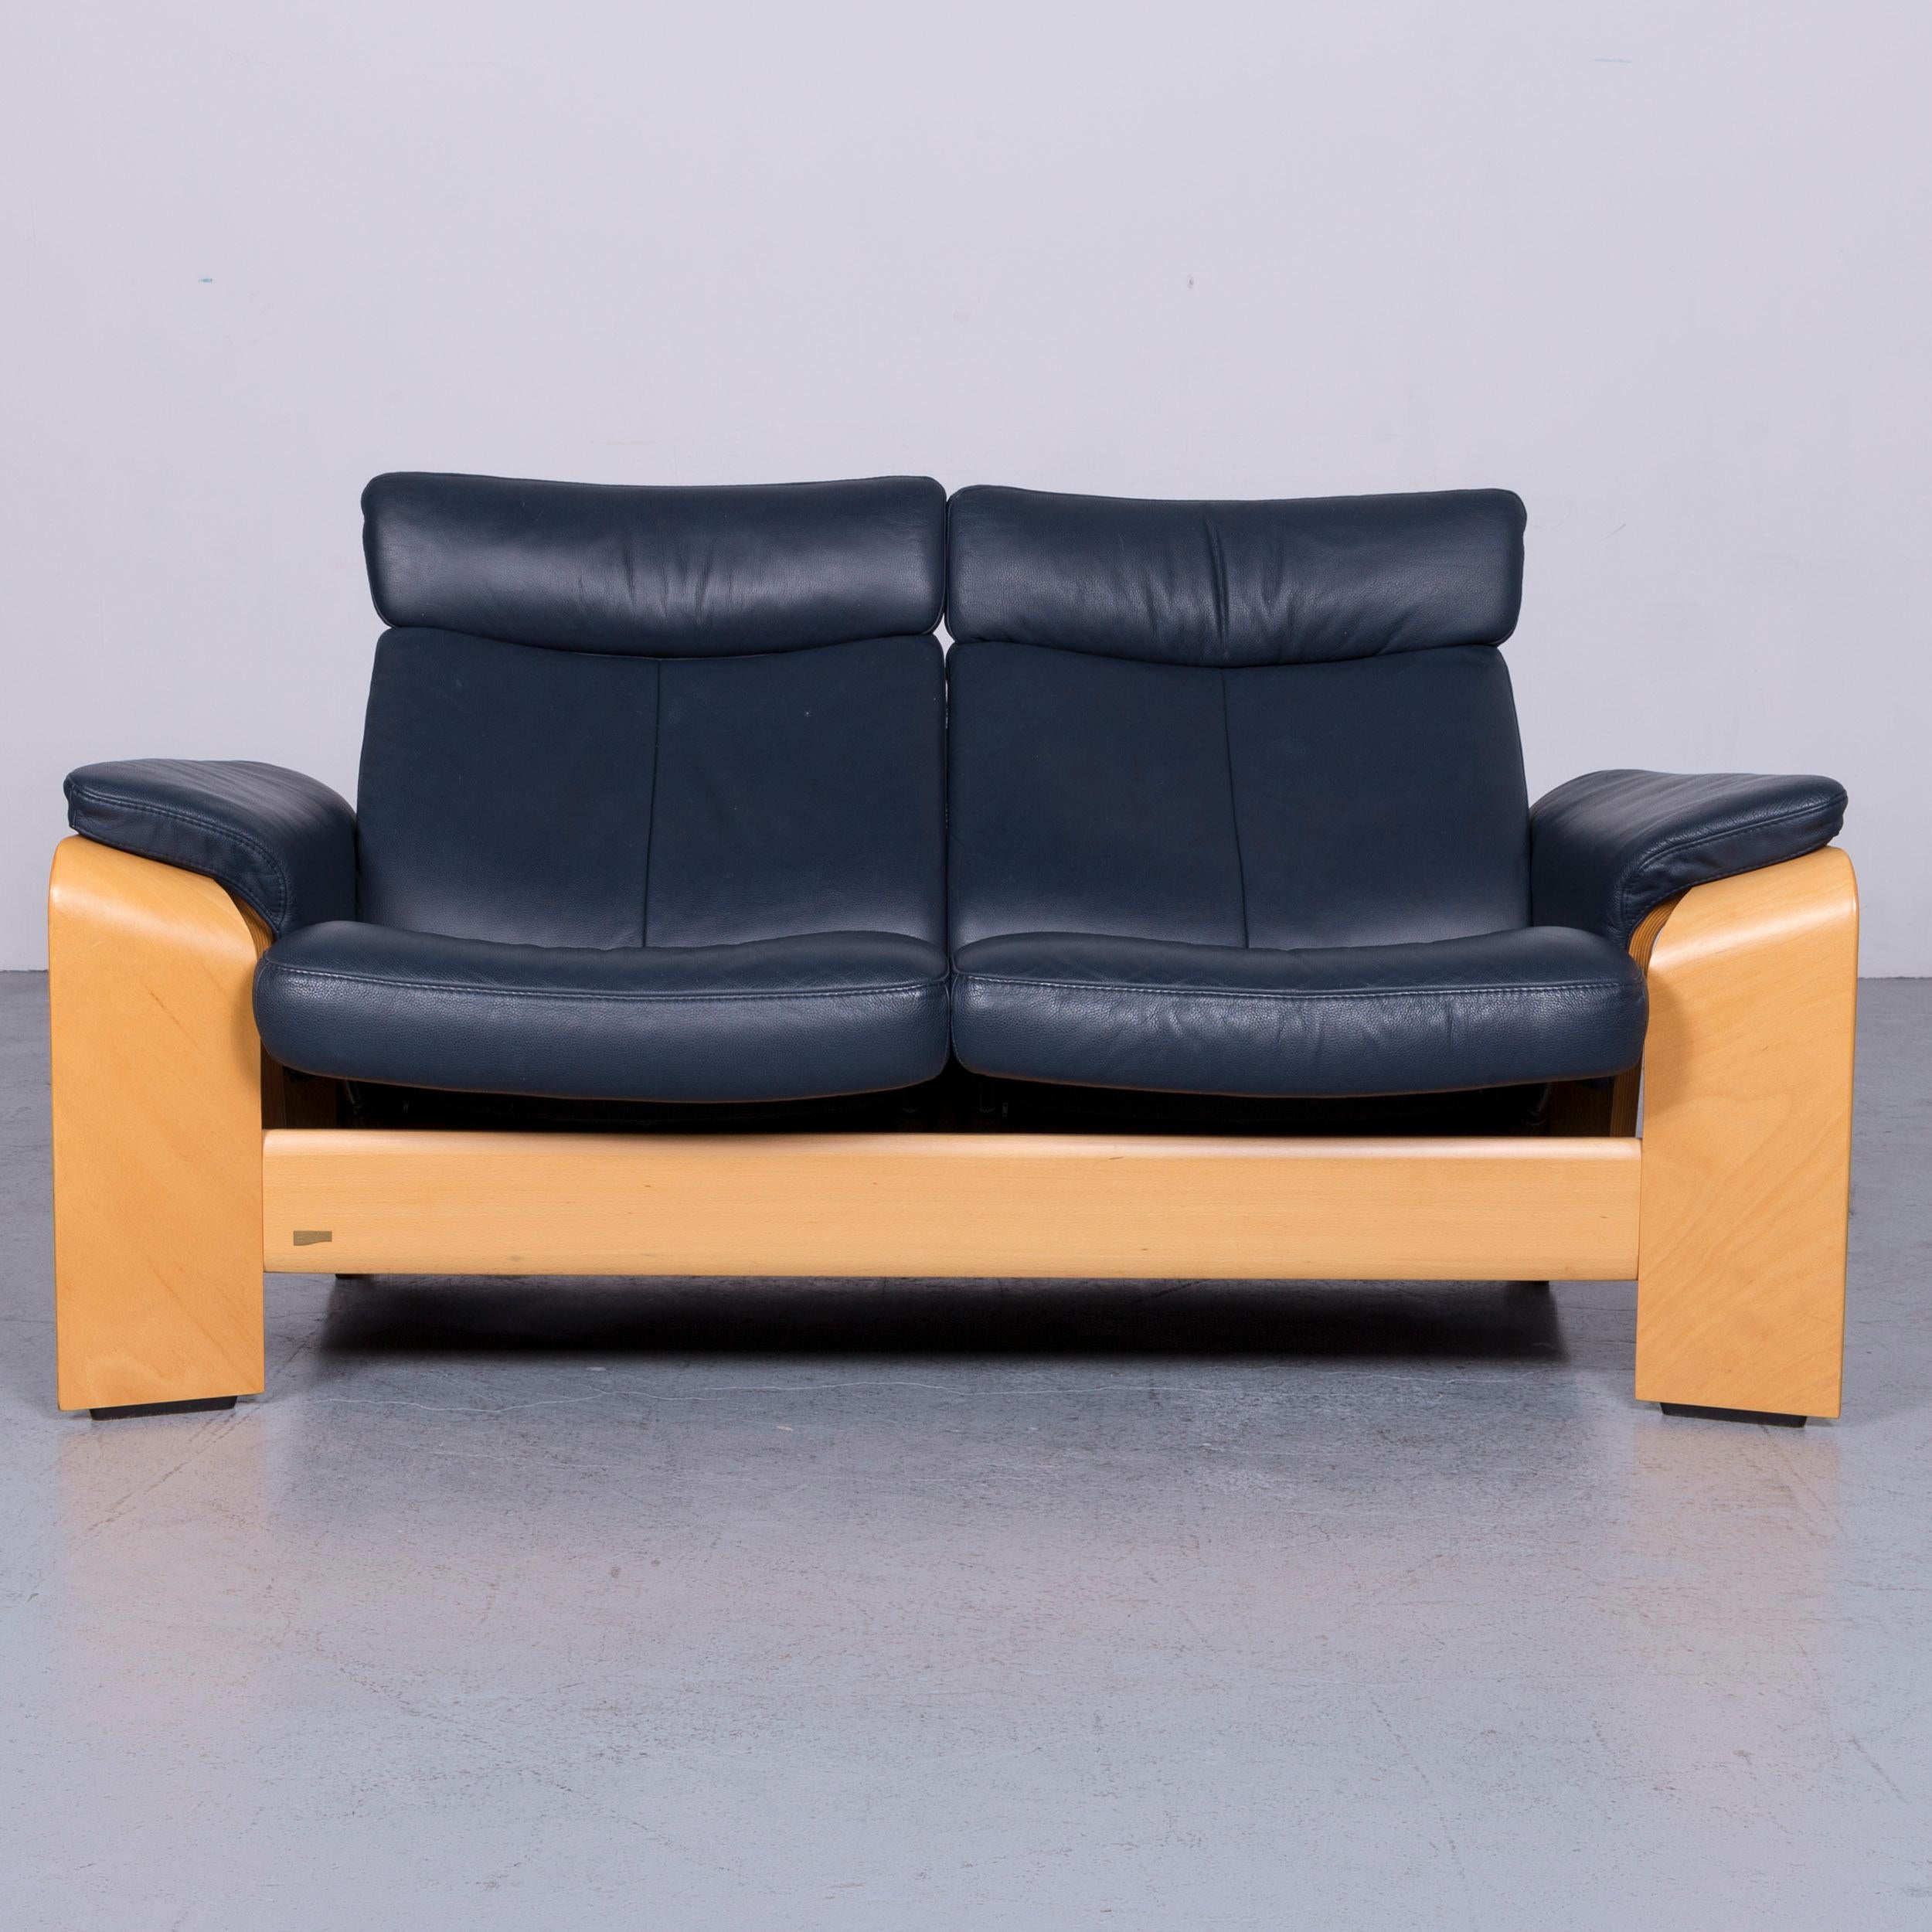 We bring to you an Stressless designer leather sofa two-seat couch in blue with function.